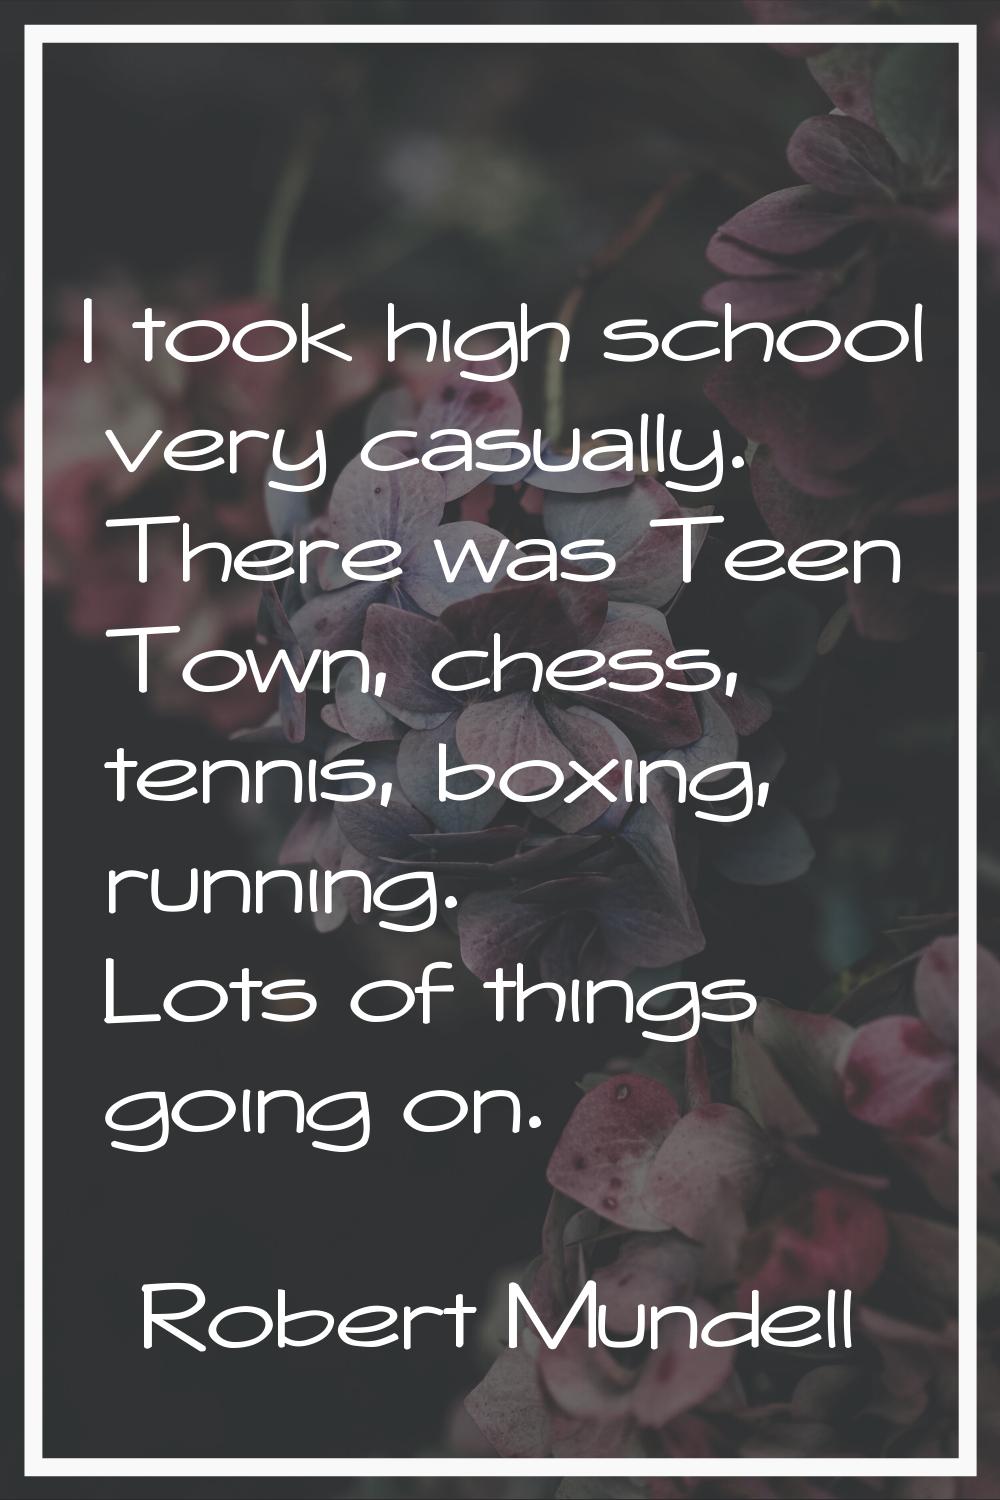 I took high school very casually. There was Teen Town, chess, tennis, boxing, running. Lots of thin